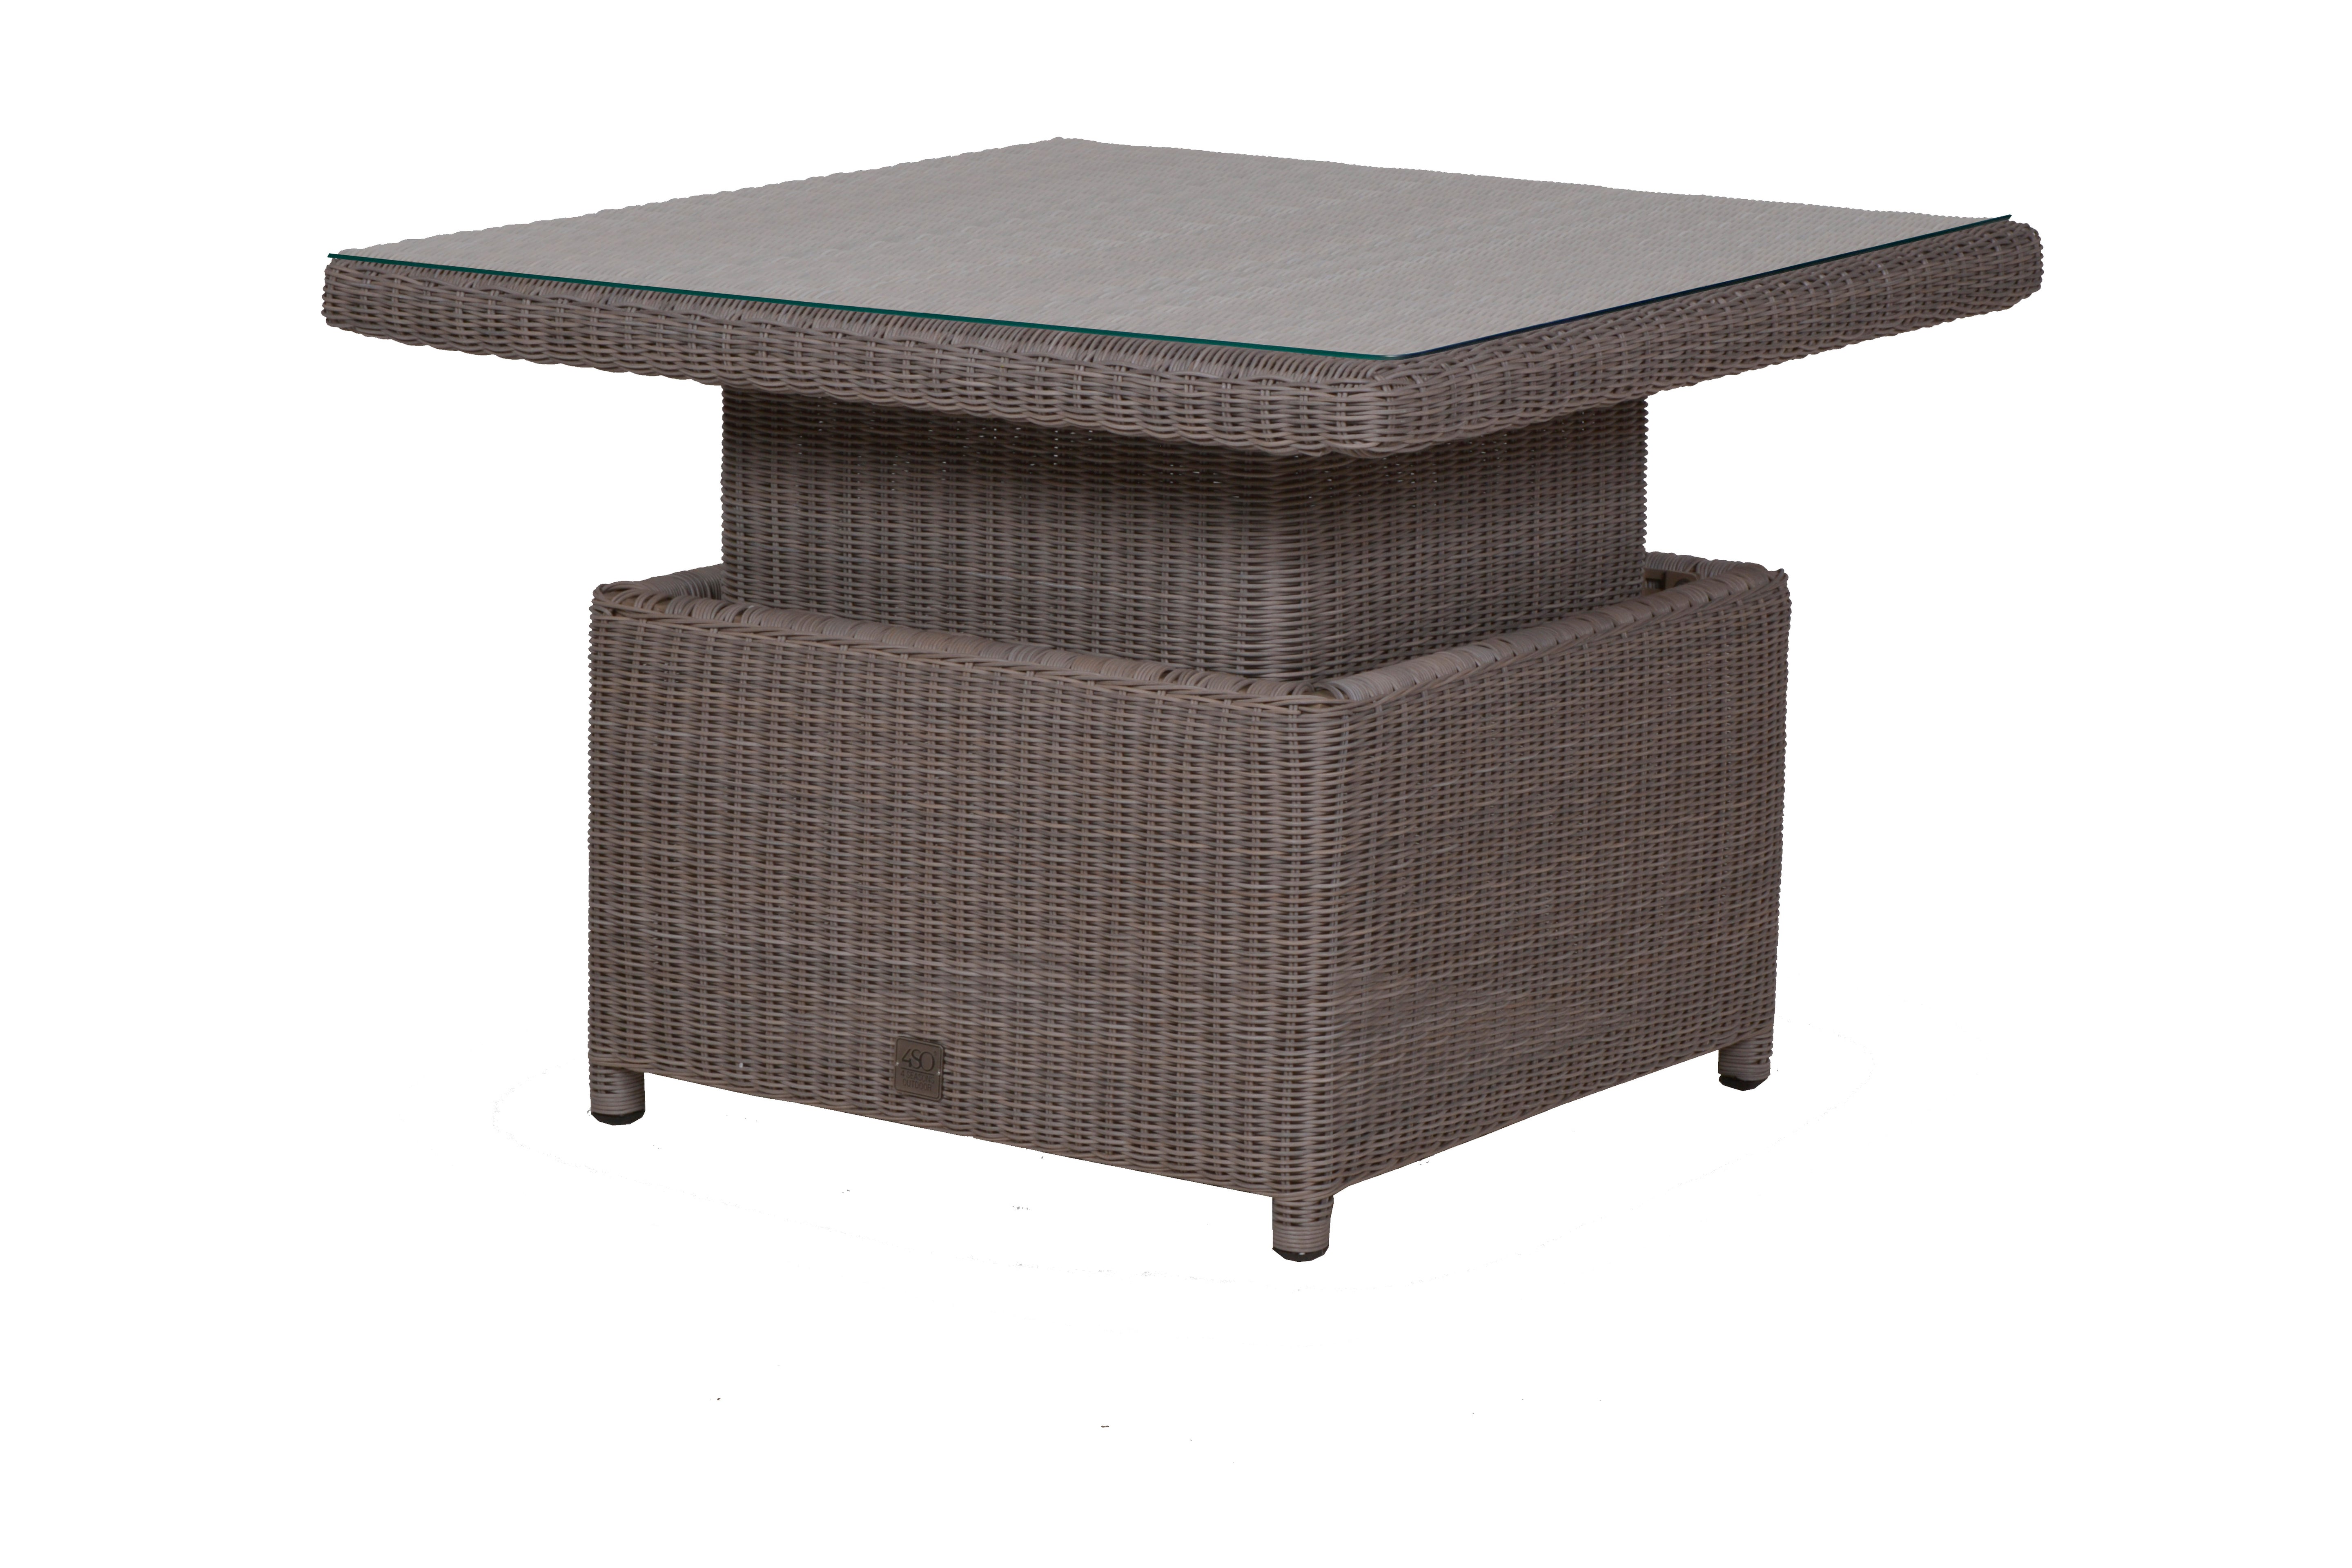 4 Seasons Outdoor Memphis Adjustable Dining Table Glass Top  90 X 90 Cm